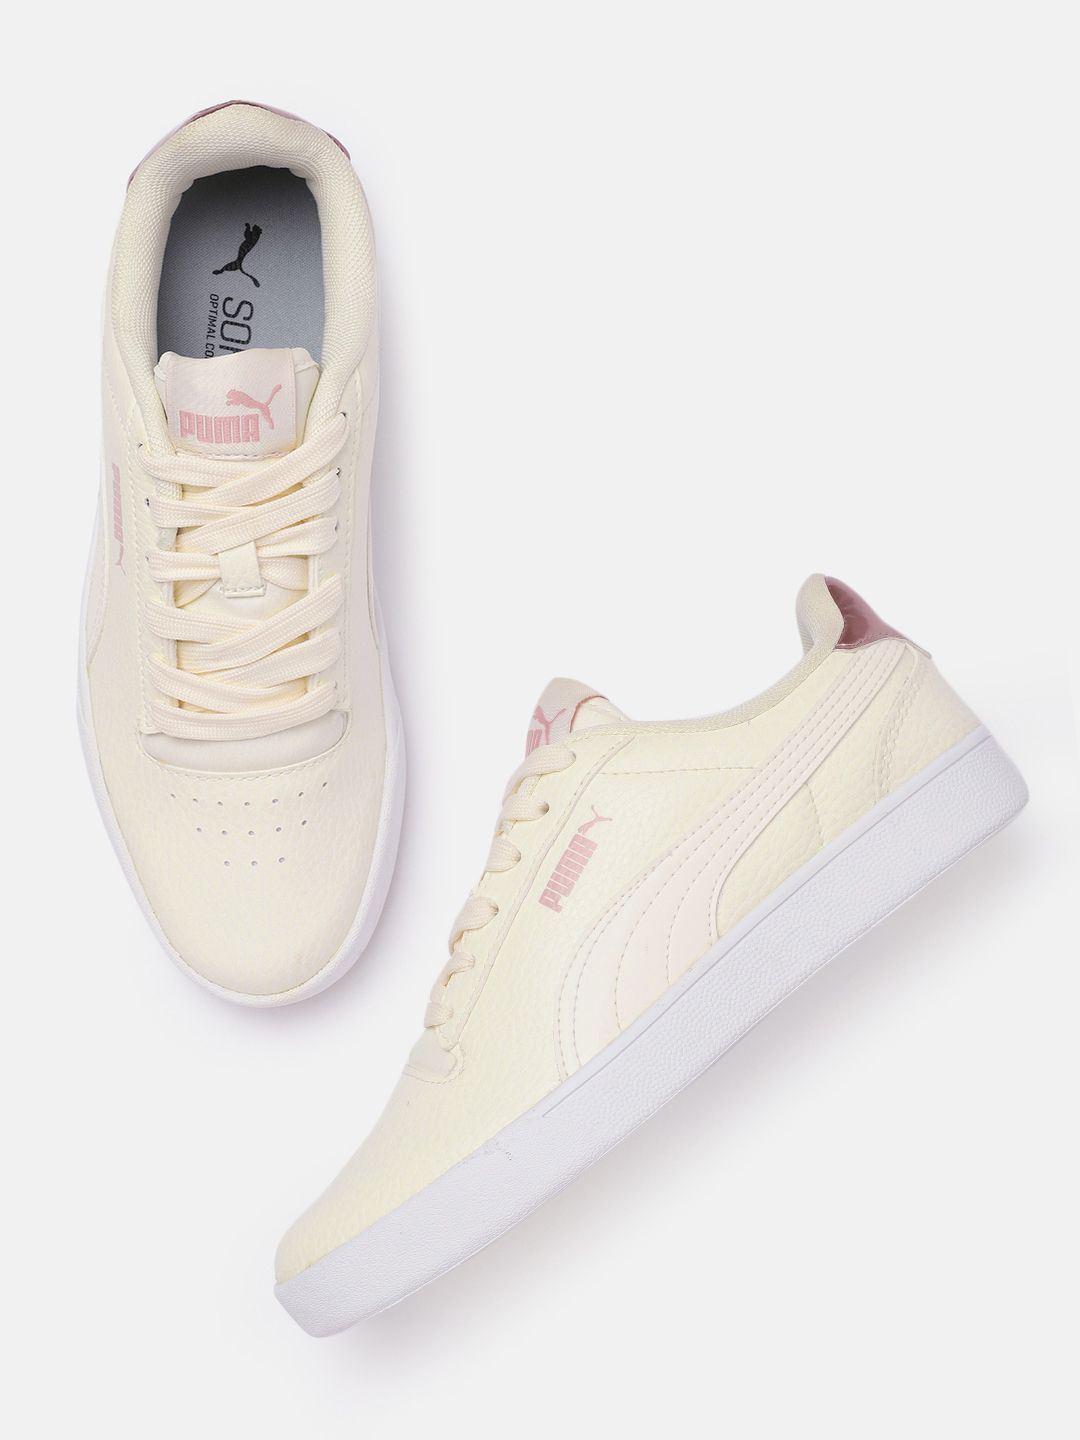 Puma Women Off-White Perforated Sneakers Price in India